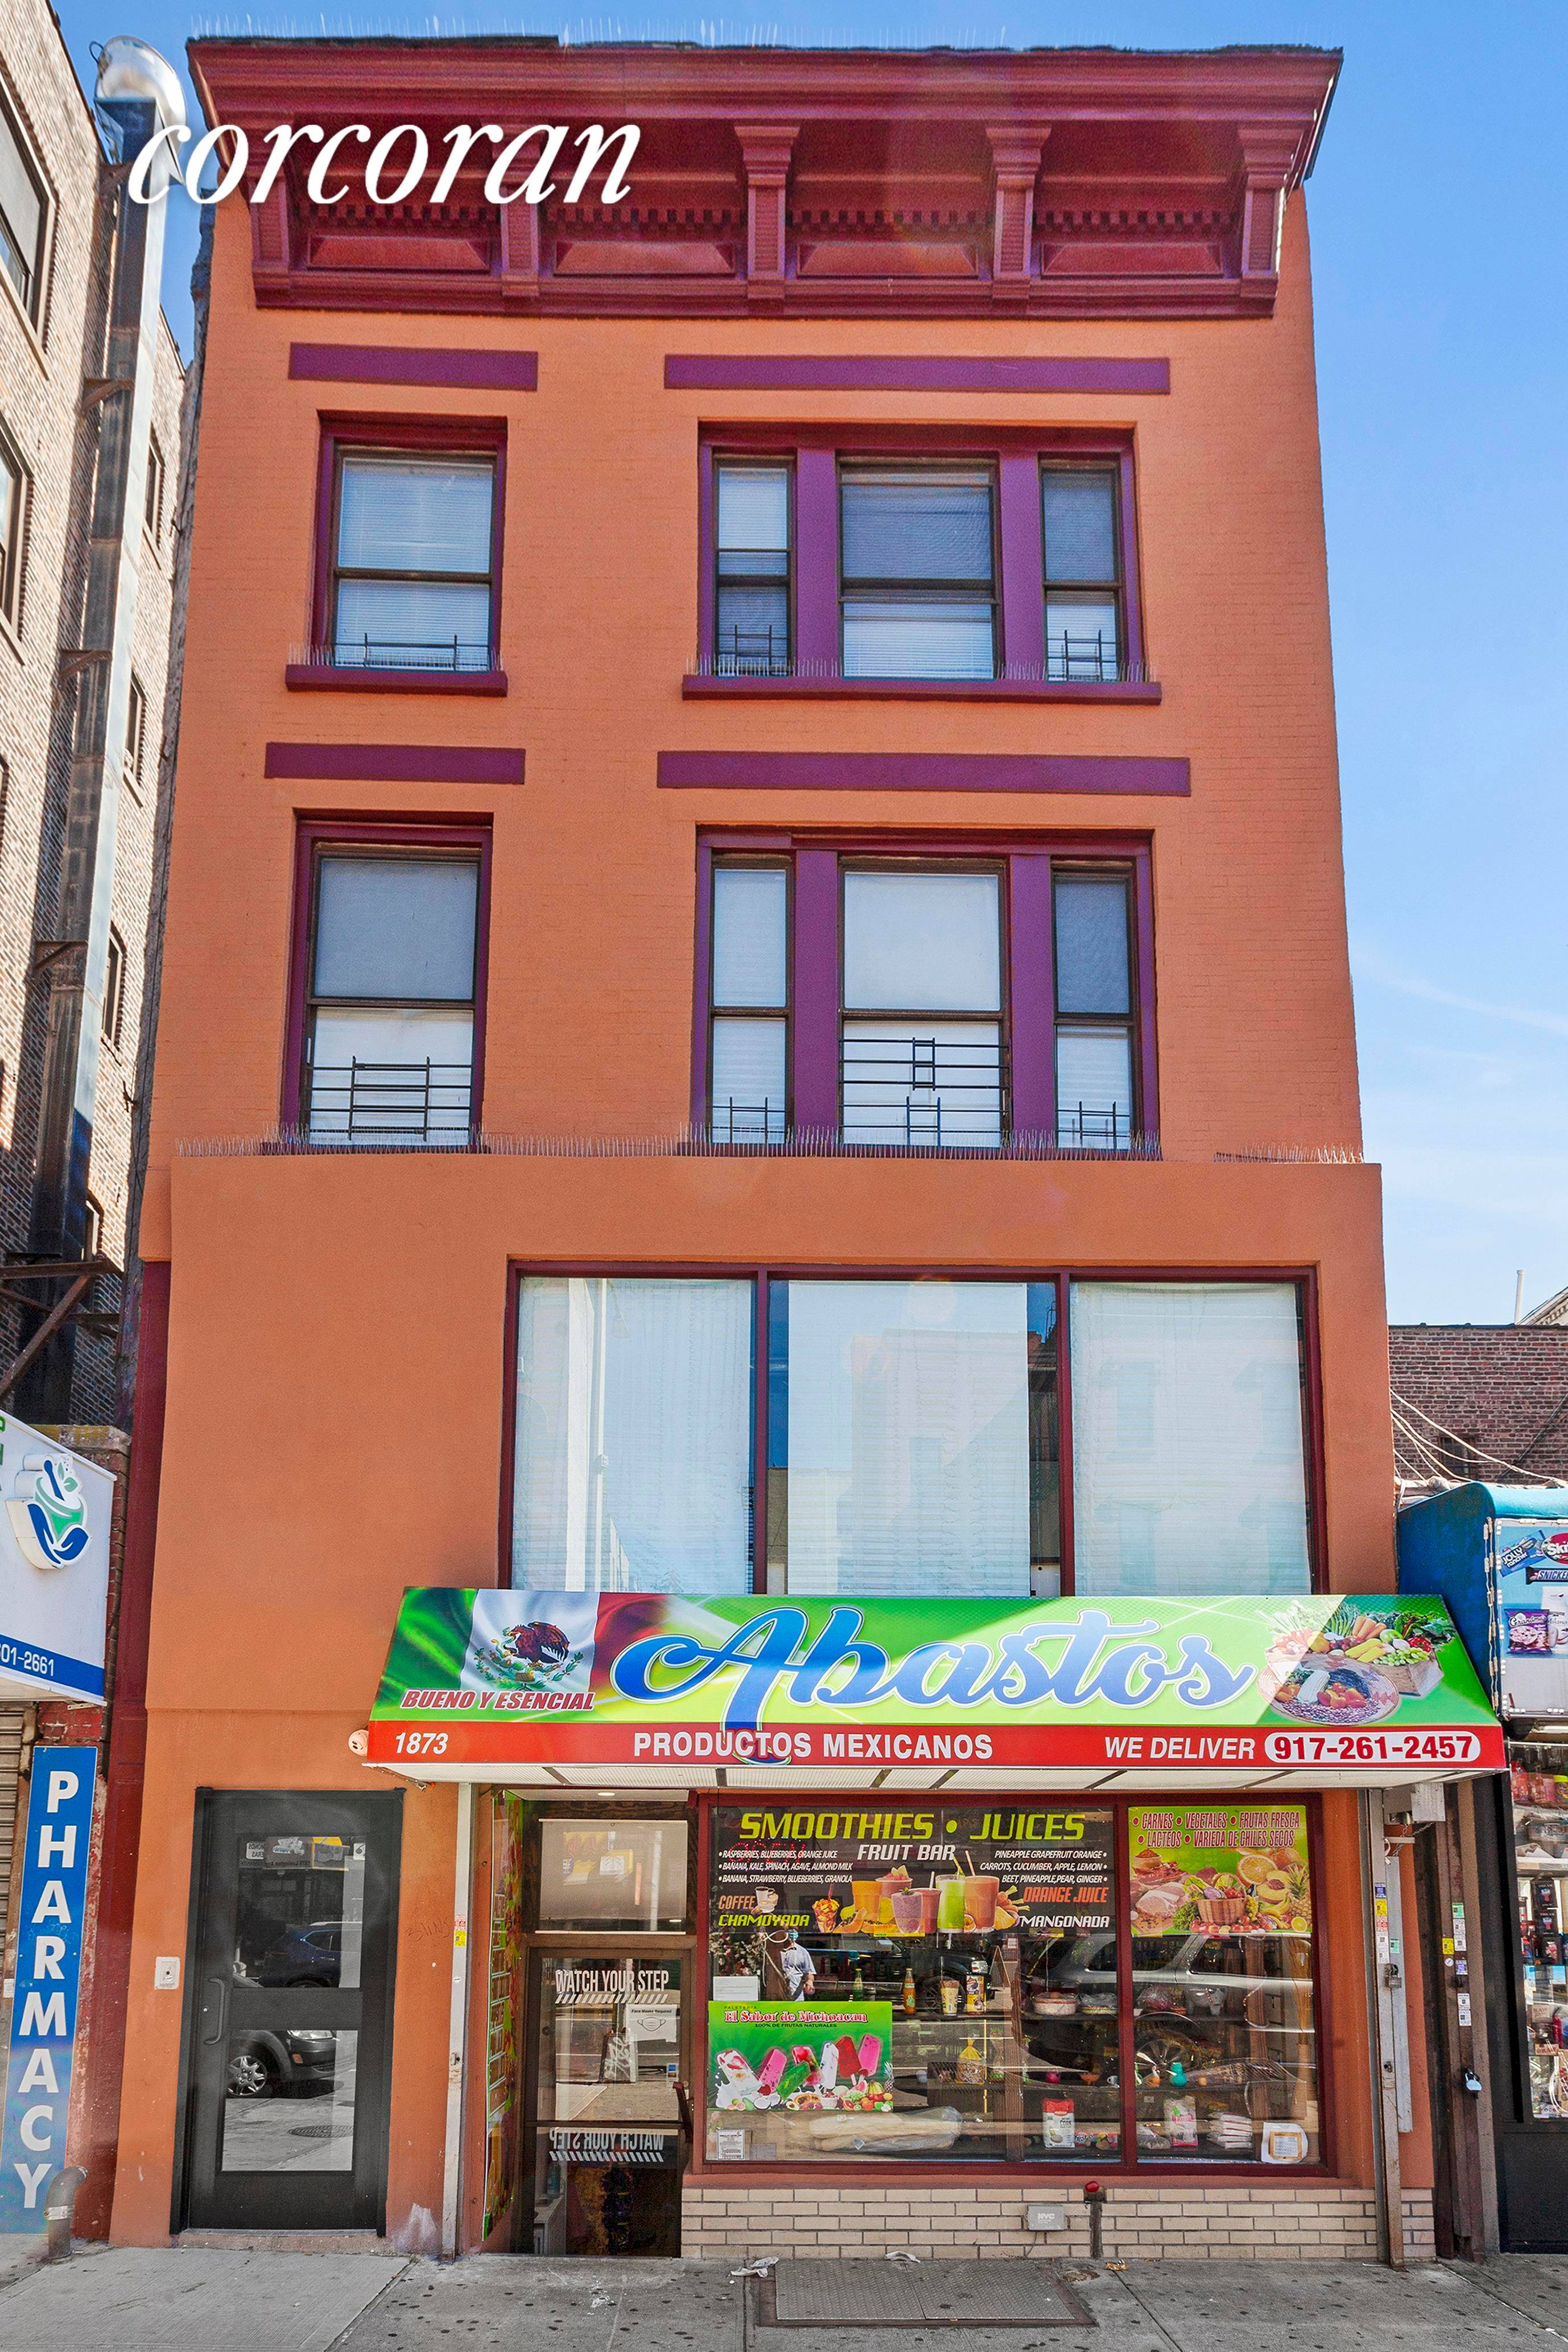 This is an Incredible and rare mixed use building, in the Heart Of East Harlem, where investors are interested in a deal like this.